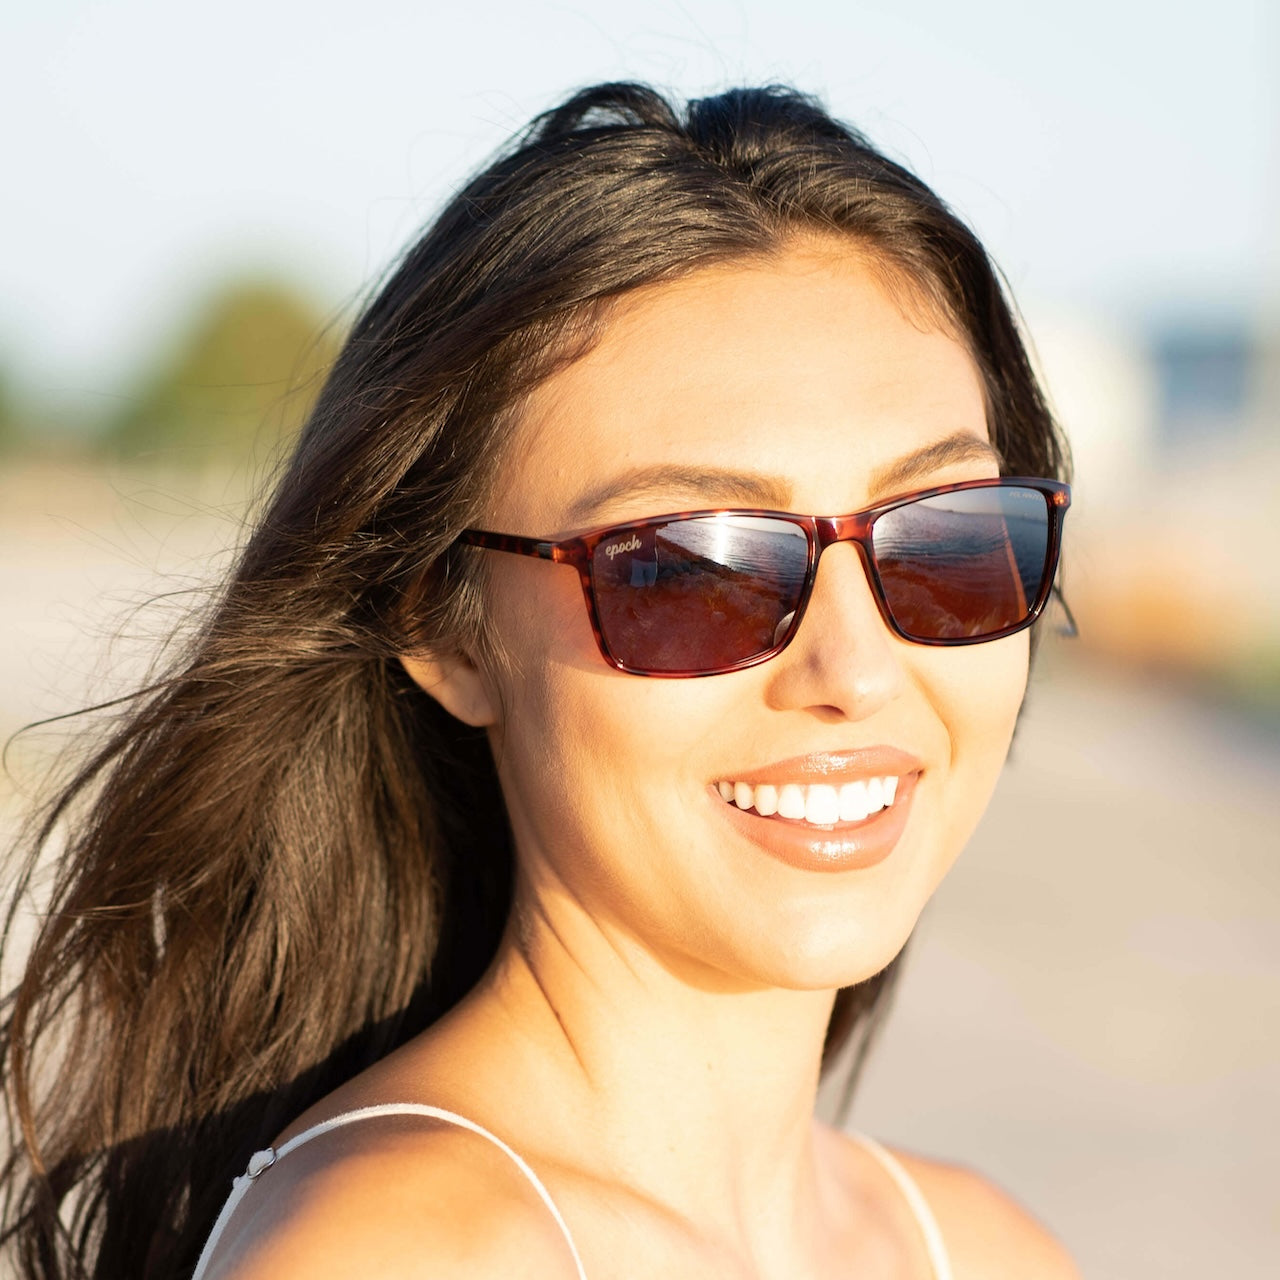 A woman wearing Murphy shades and smiling outdoors.